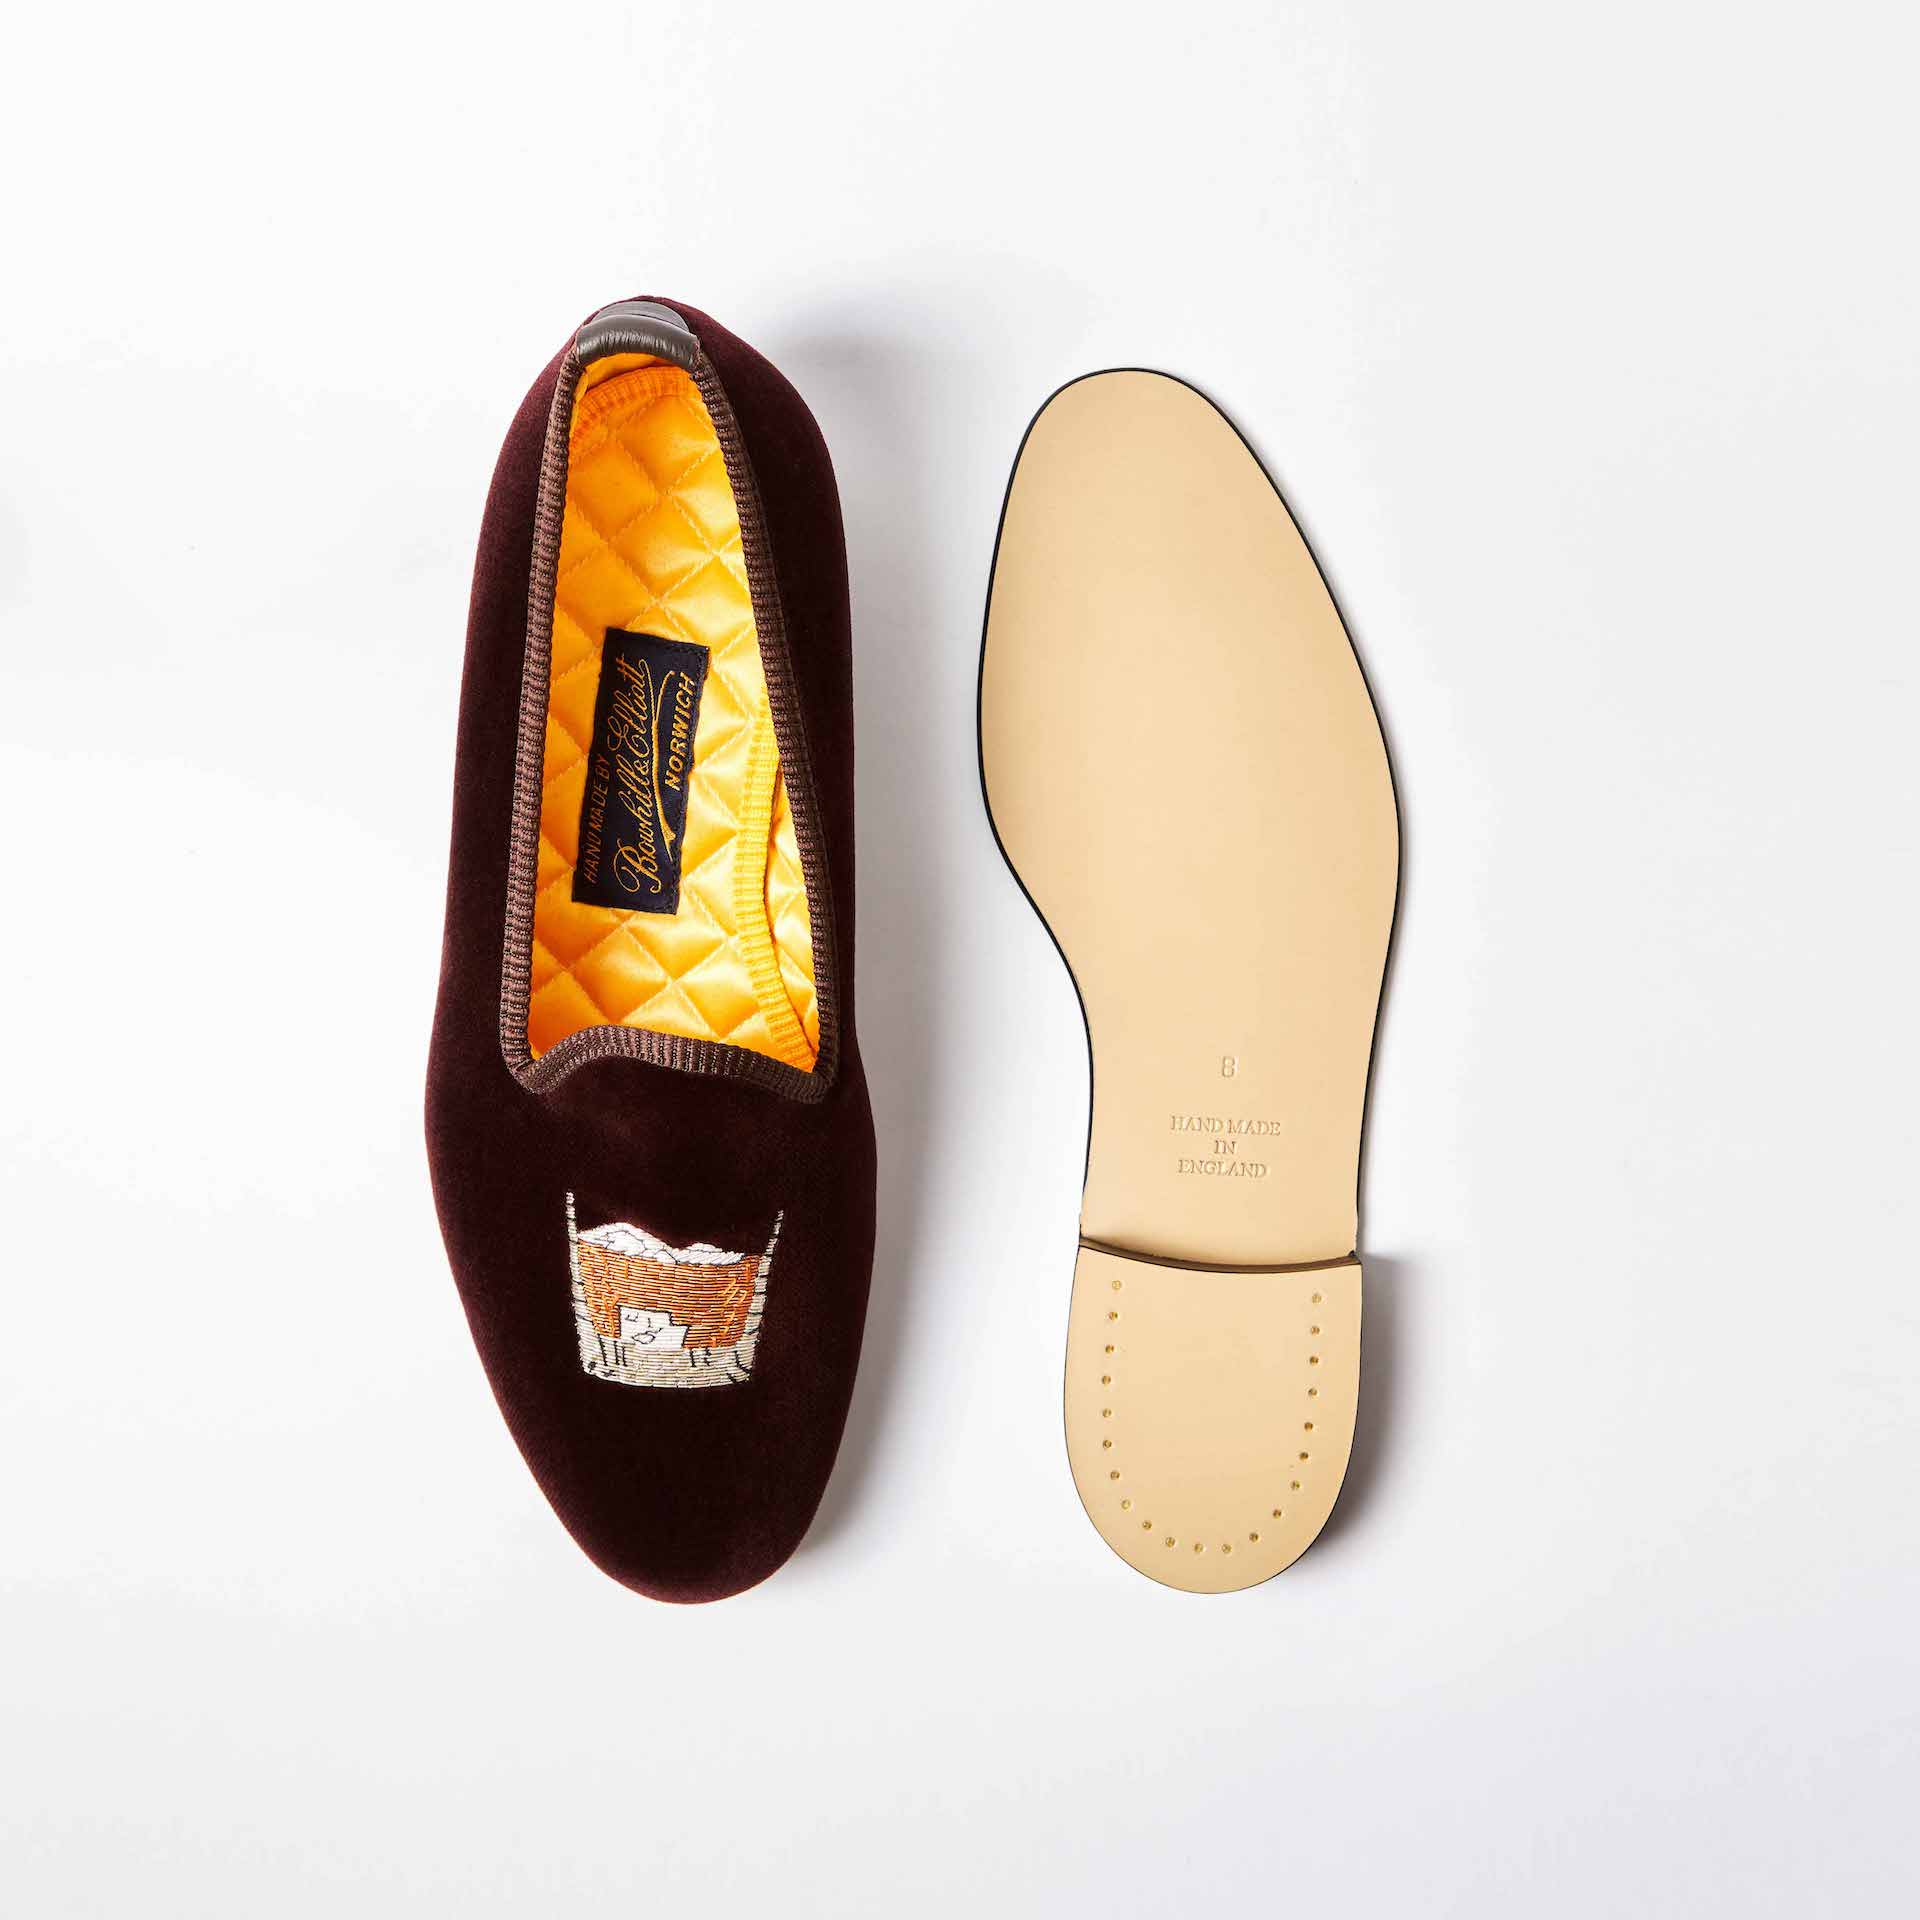 Brown Velvet Venetian Slippers with Embroidered Scotch on the Rocks